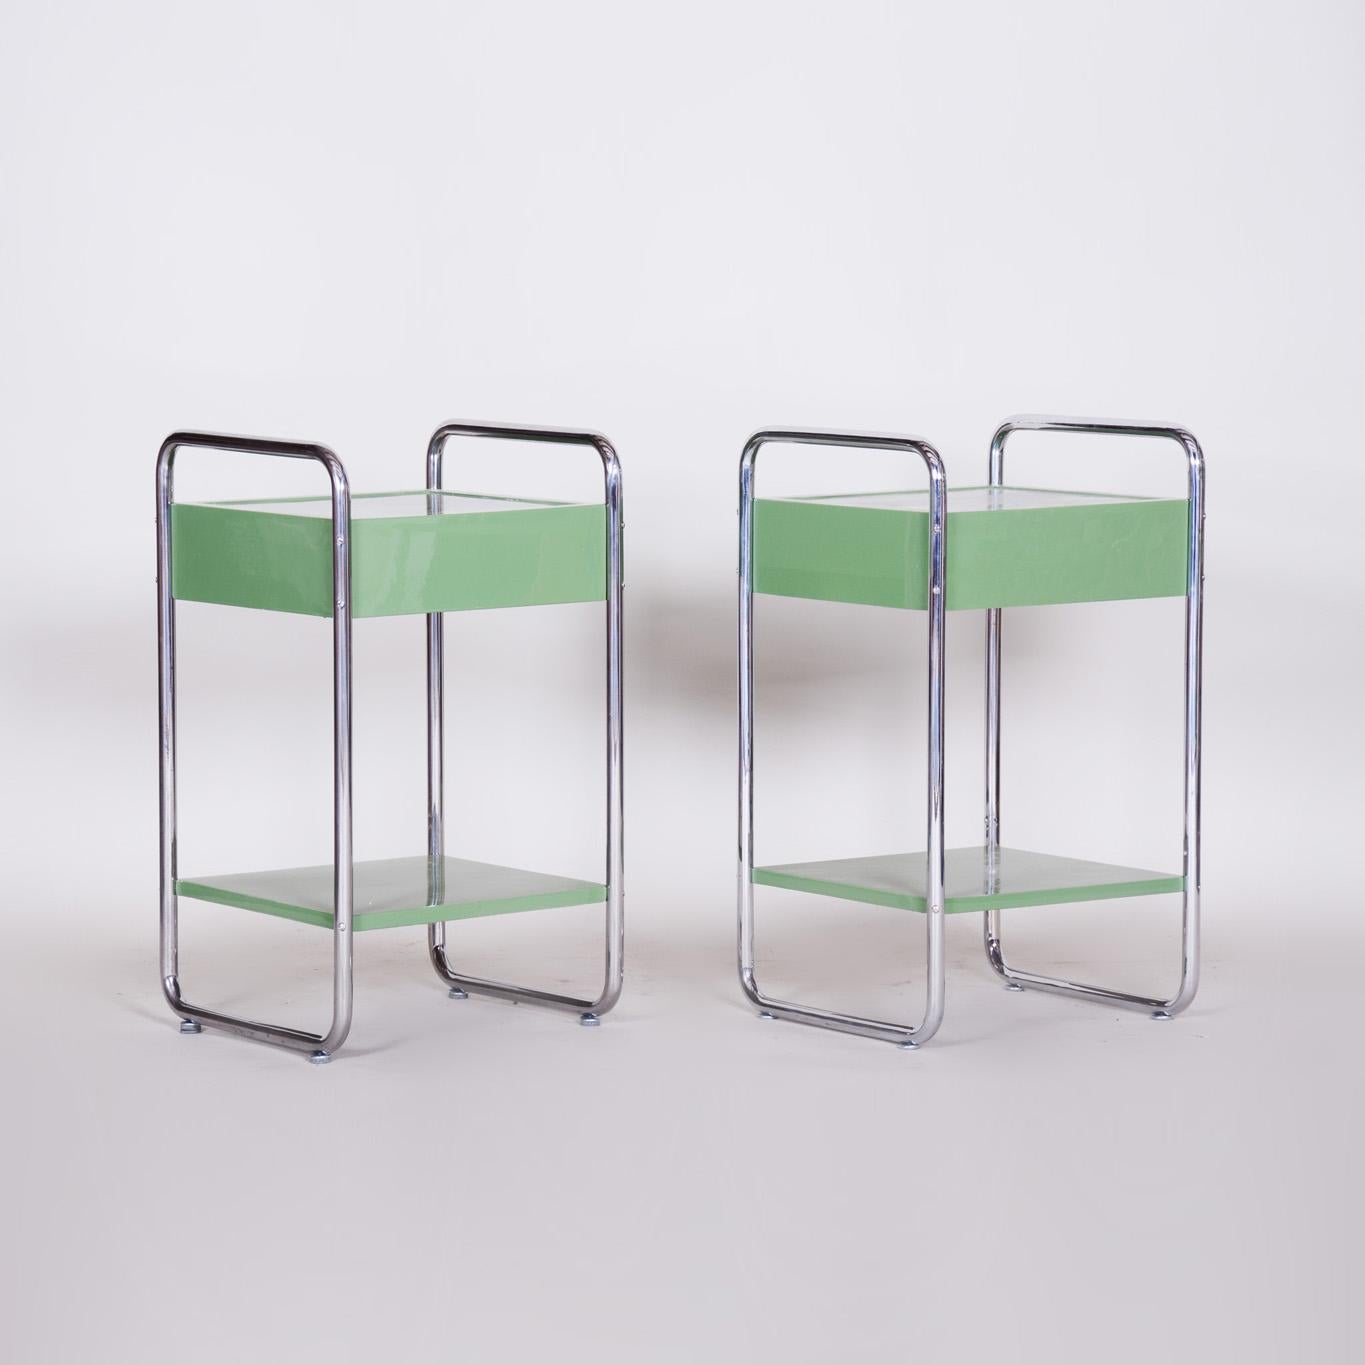 Restored Bauhaus Pair of Bed-Side Tables, Chrome-Plated Steel, Czech, 1930s For Sale 5